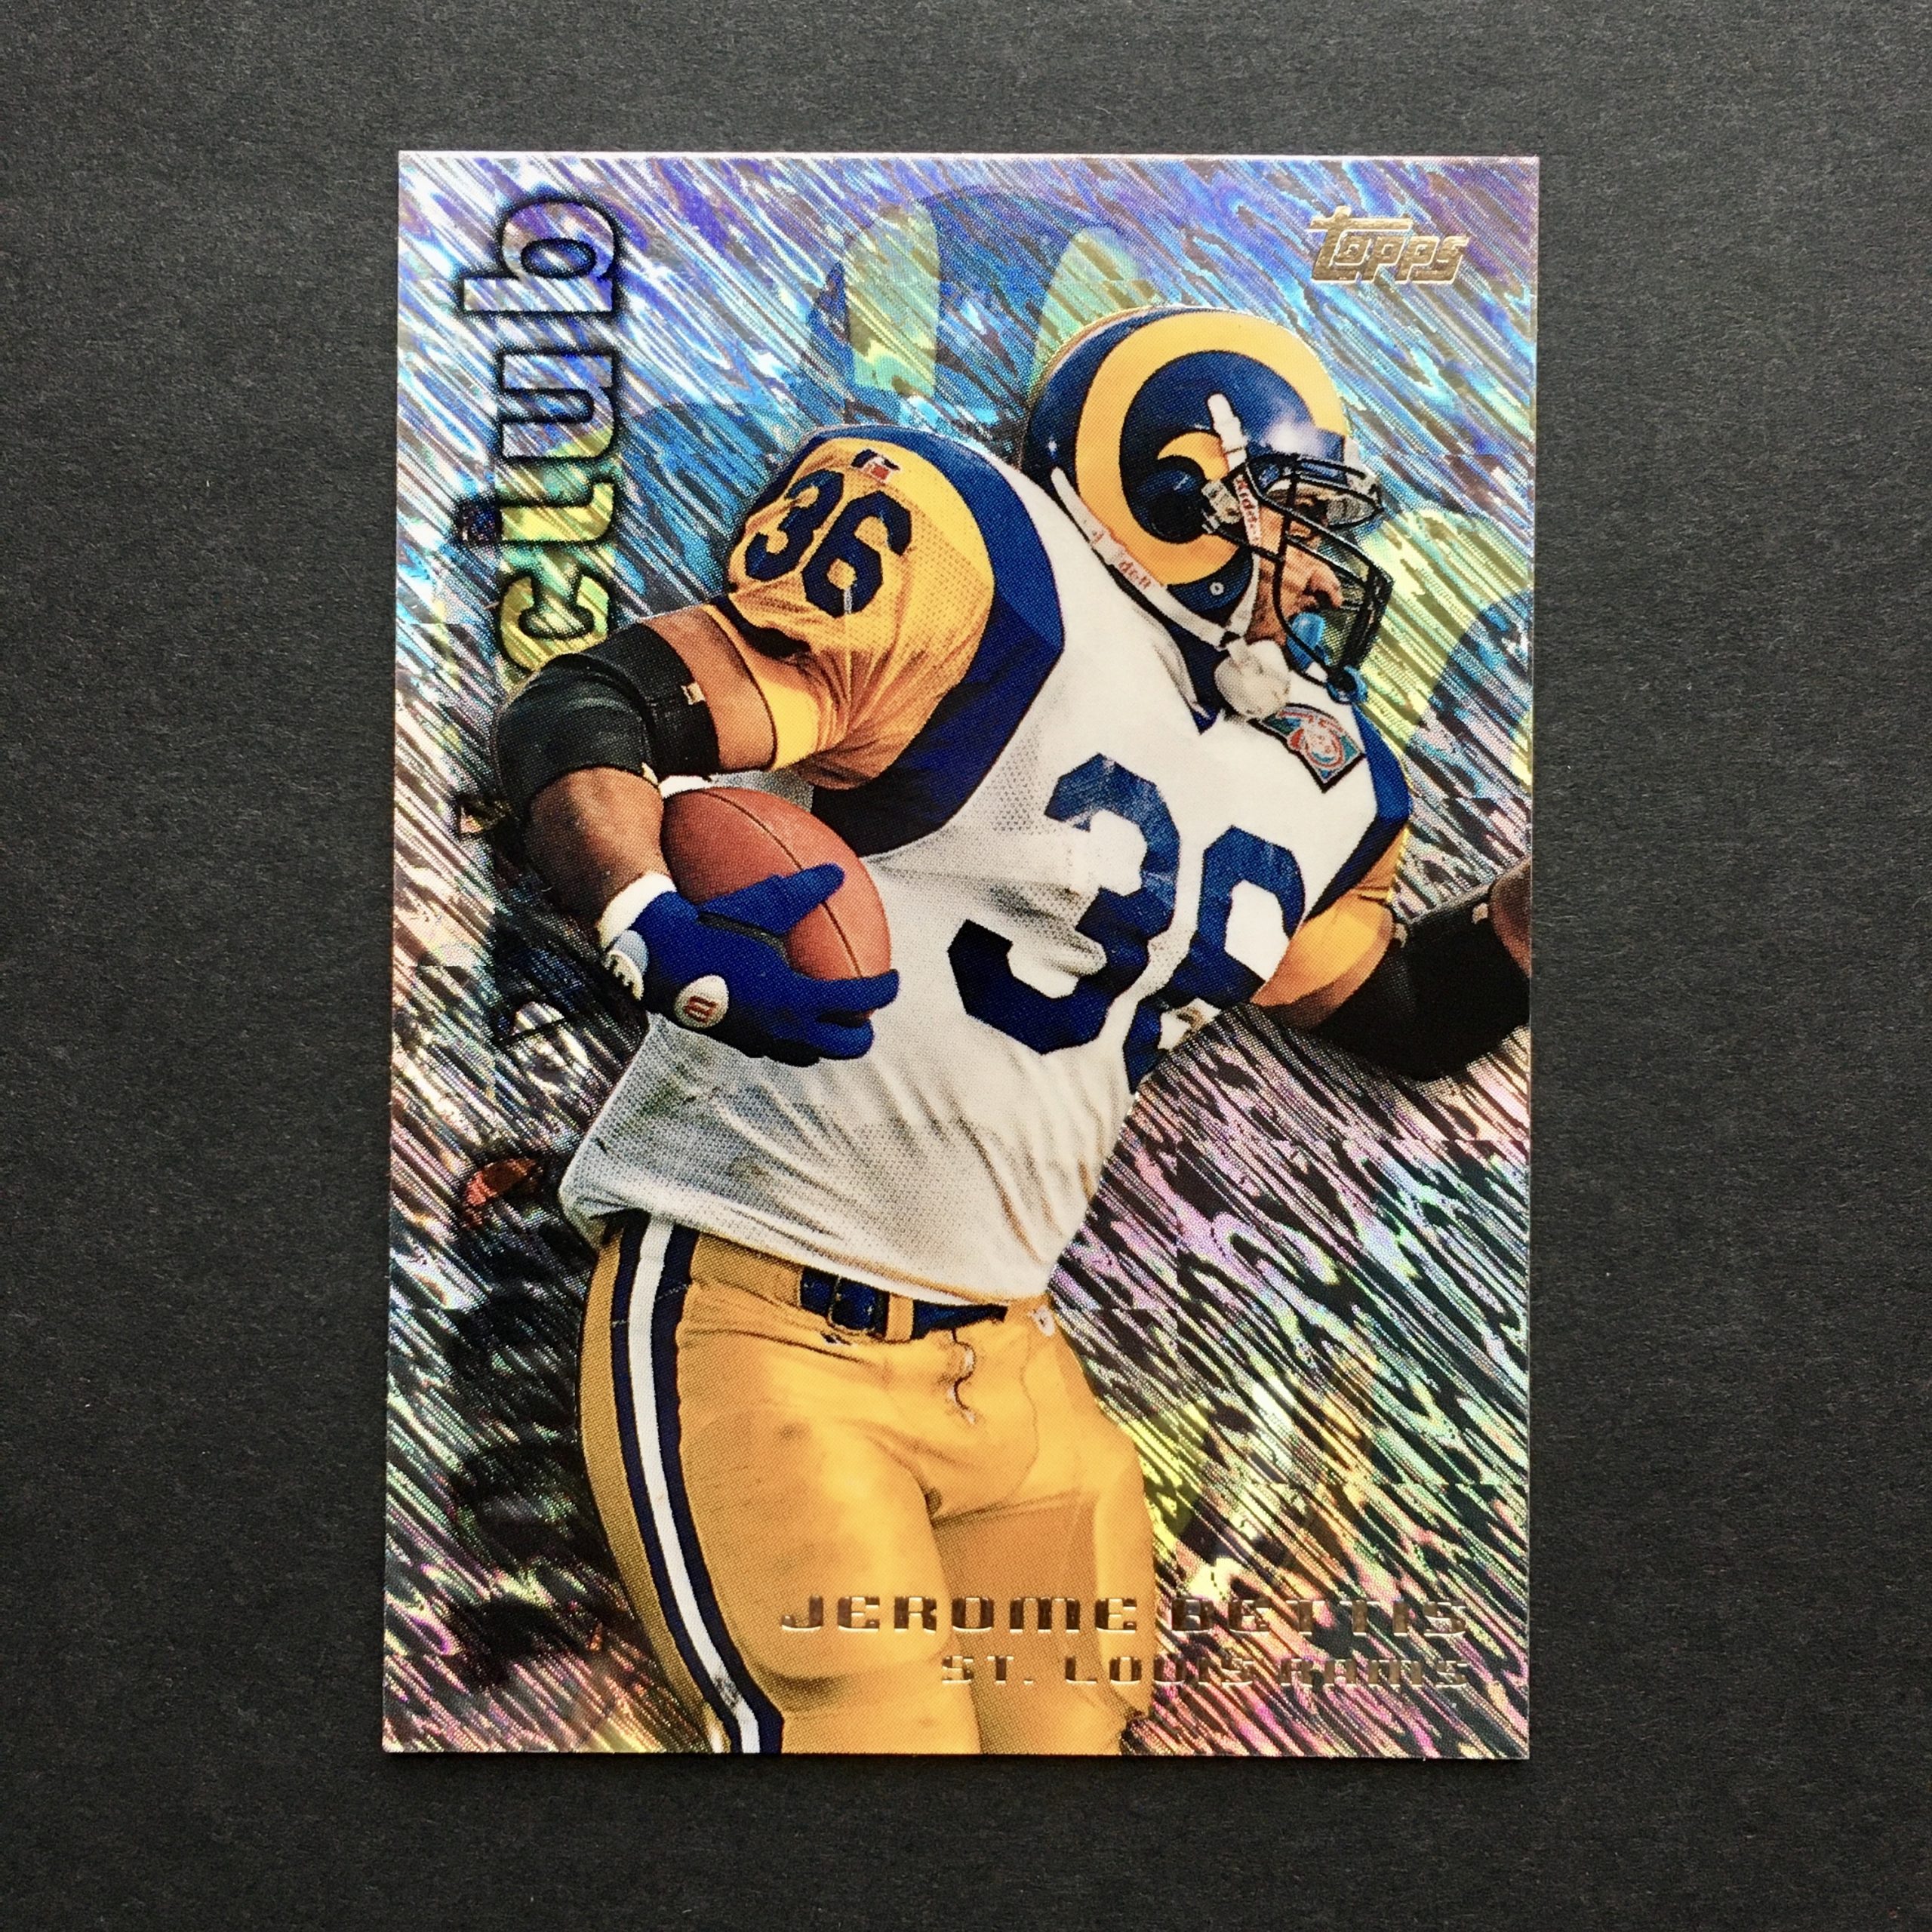 Jerome Bettis 1995 Topps 1000 Yard Club Booster Holo